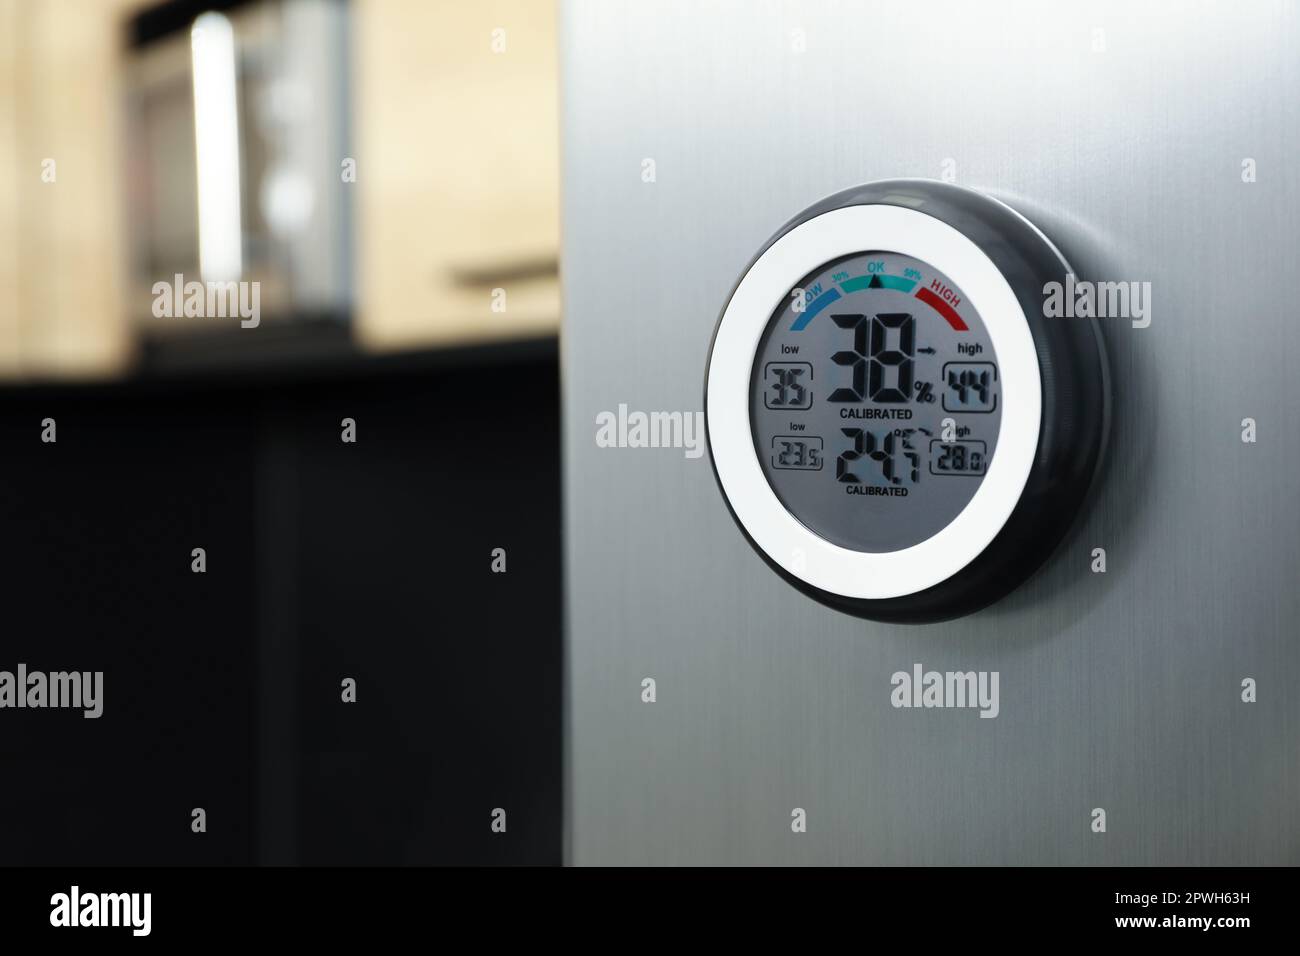 https://c8.alamy.com/comp/2PWH63H/round-digital-hygrometer-with-thermometer-on-fridge-in-kitchen-space-for-text-2PWH63H.jpg